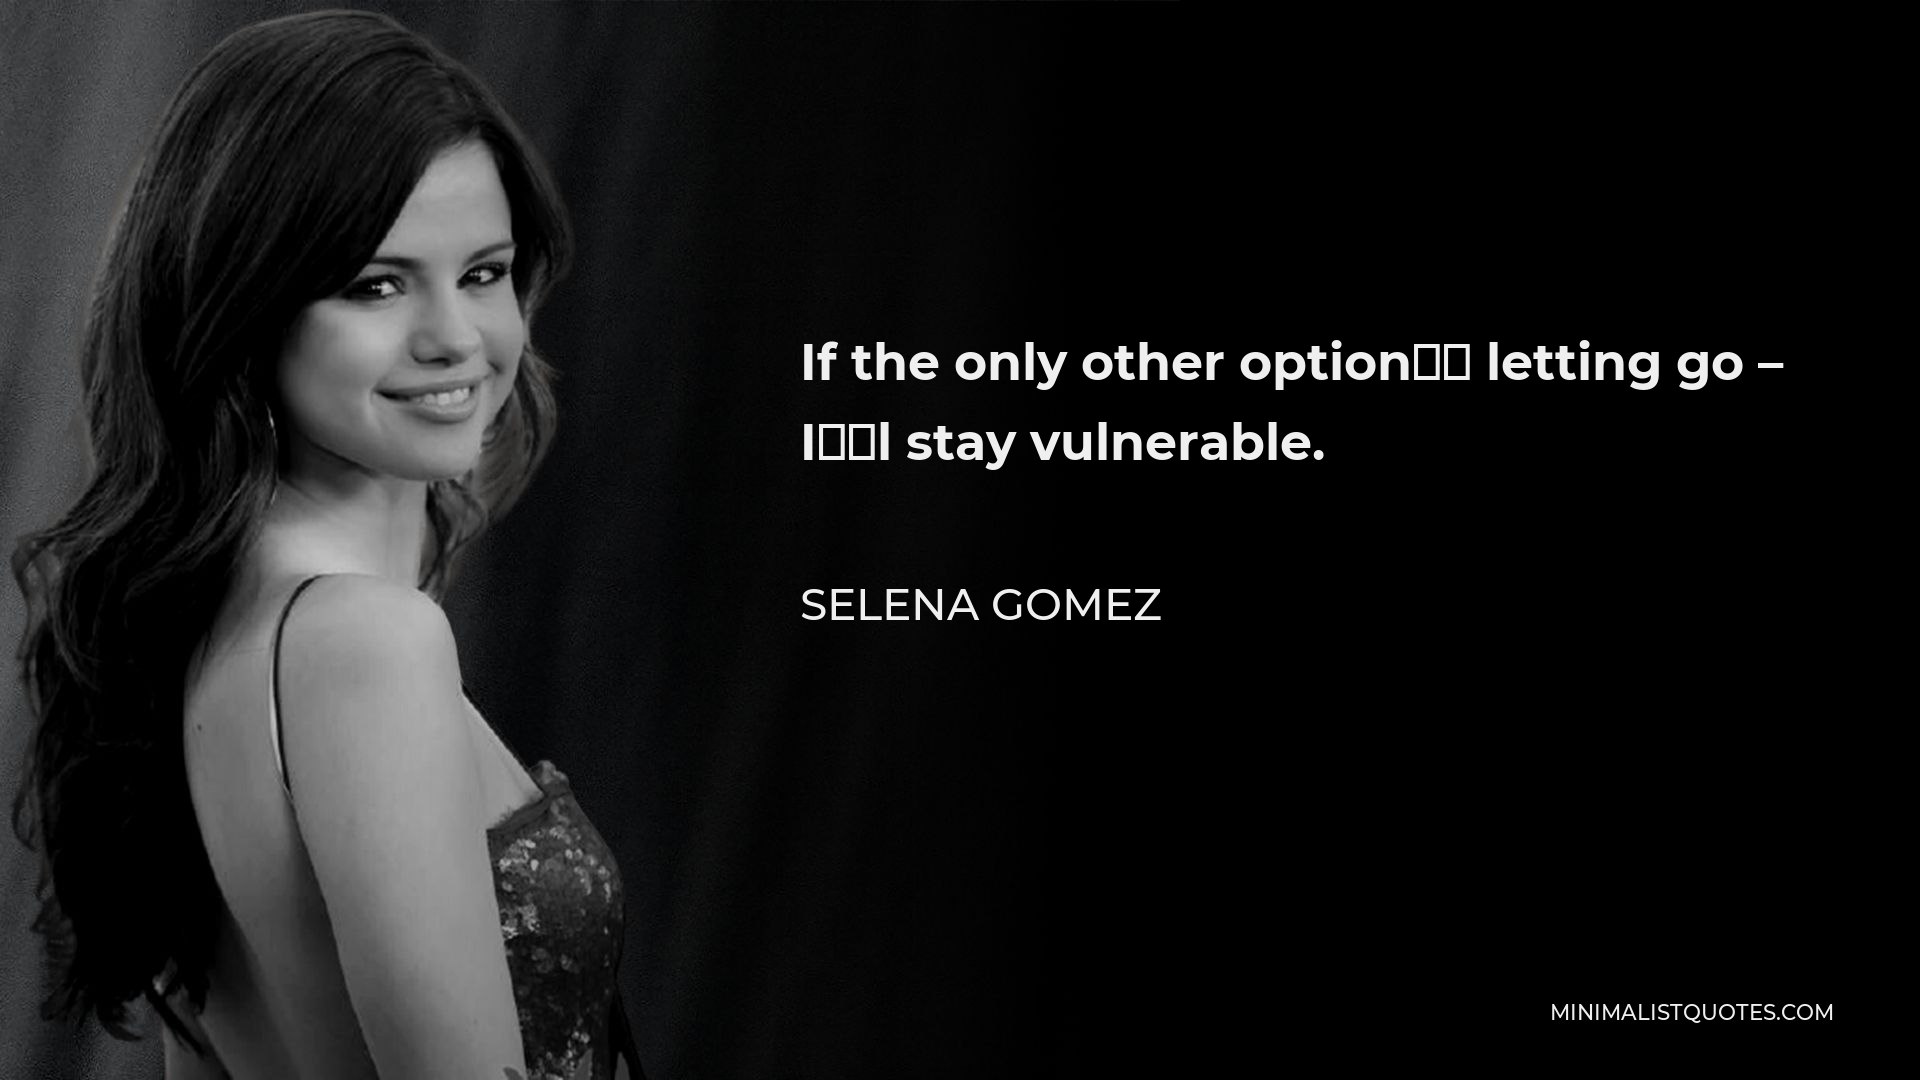 Selena Gomez Quote - If the only other option’s letting go – I’ll stay vulnerable.